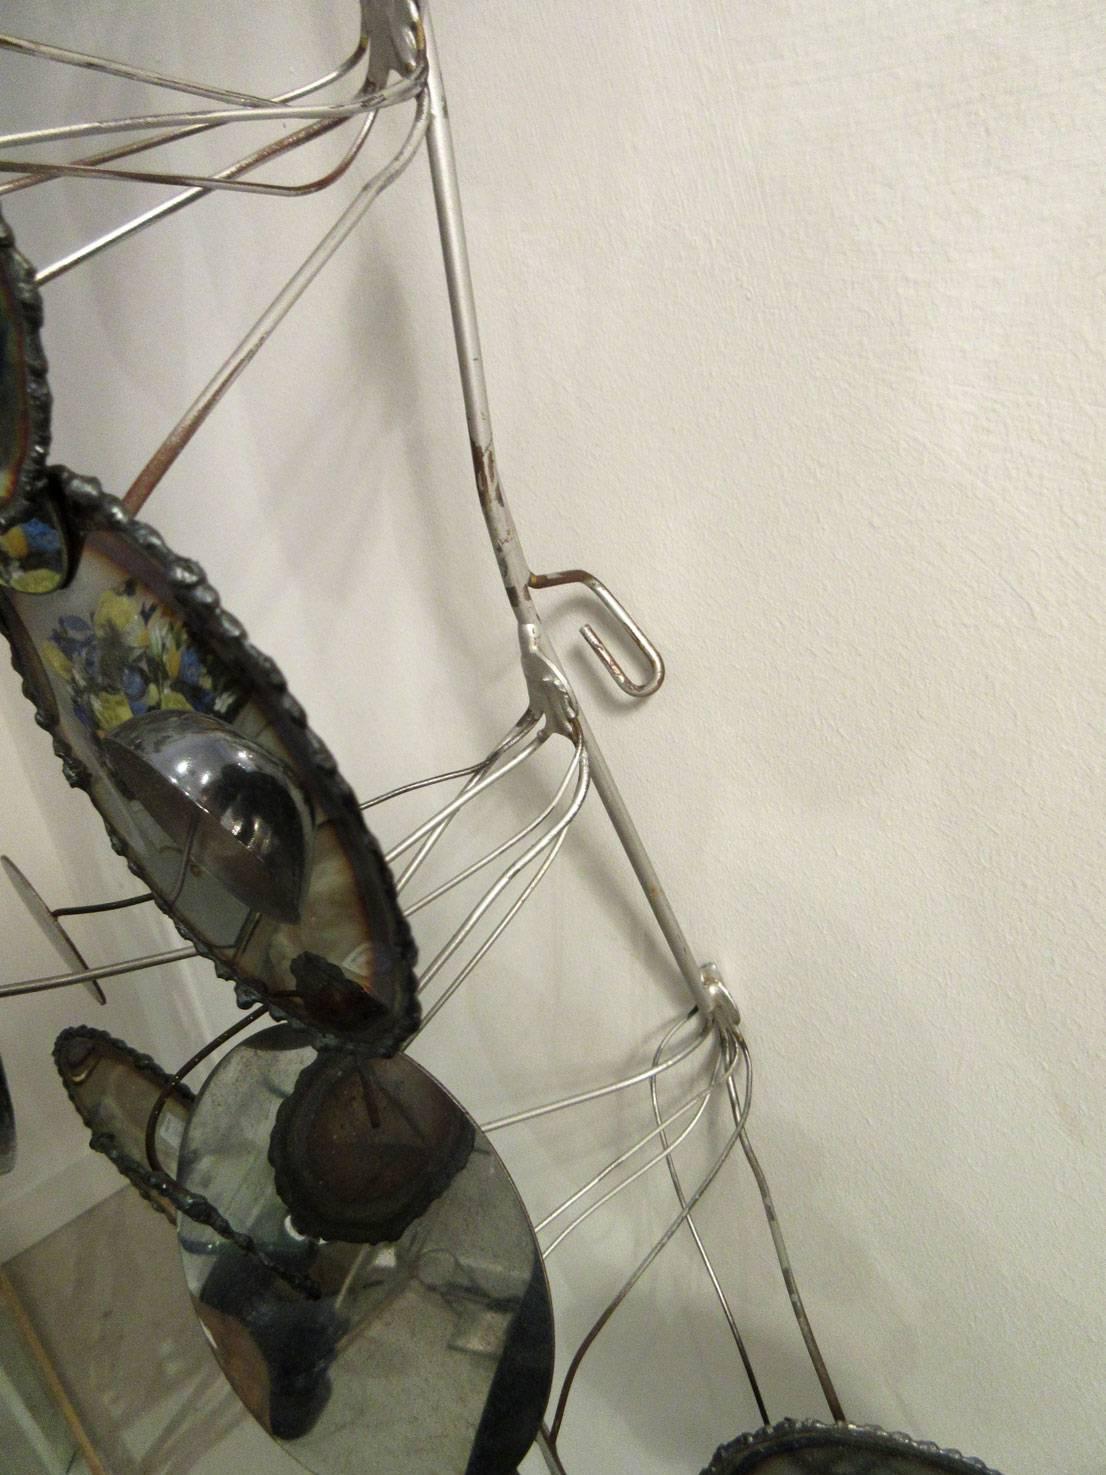 C. Jere Chrome Raindrops Wall Sculpture, Signed 3